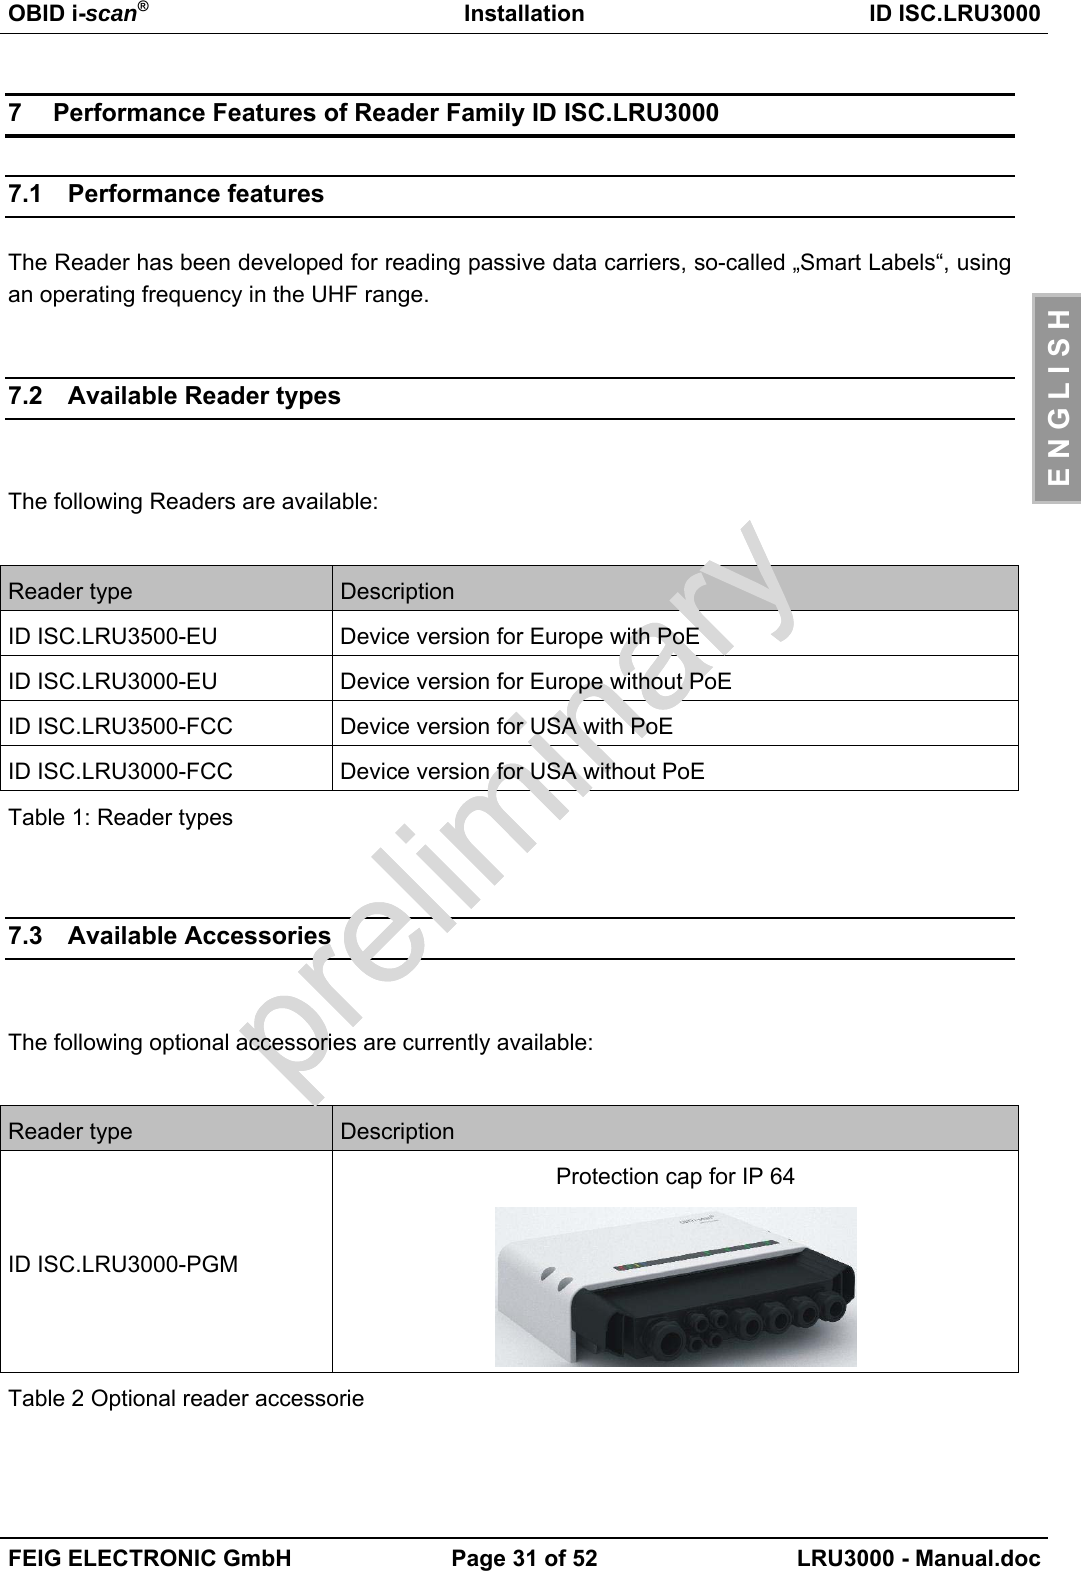 OBID i-scan®Installation ID ISC.LRU3000FEIG ELECTRONIC GmbH Page 31 of 52 LRU3000 - Manual.docE N G L I S H7  Performance Features of Reader Family ID ISC.LRU30007.1 Performance featuresThe Reader has been developed for reading passive data carriers, so-called „Smart Labels“, usingan operating frequency in the UHF range.7.2 Available Reader typesThe following Readers are available:Reader type DescriptionID ISC.LRU3500-EU Device version for Europe with PoEID ISC.LRU3000-EU Device version for Europe without PoEID ISC.LRU3500-FCC Device version for USA with PoEID ISC.LRU3000-FCC Device version for USA without PoETable 1: Reader types7.3 Available AccessoriesThe following optional accessories are currently available:Reader type DescriptionID ISC.LRU3000-PGMProtection cap for IP 64Table 2 Optional reader accessorie